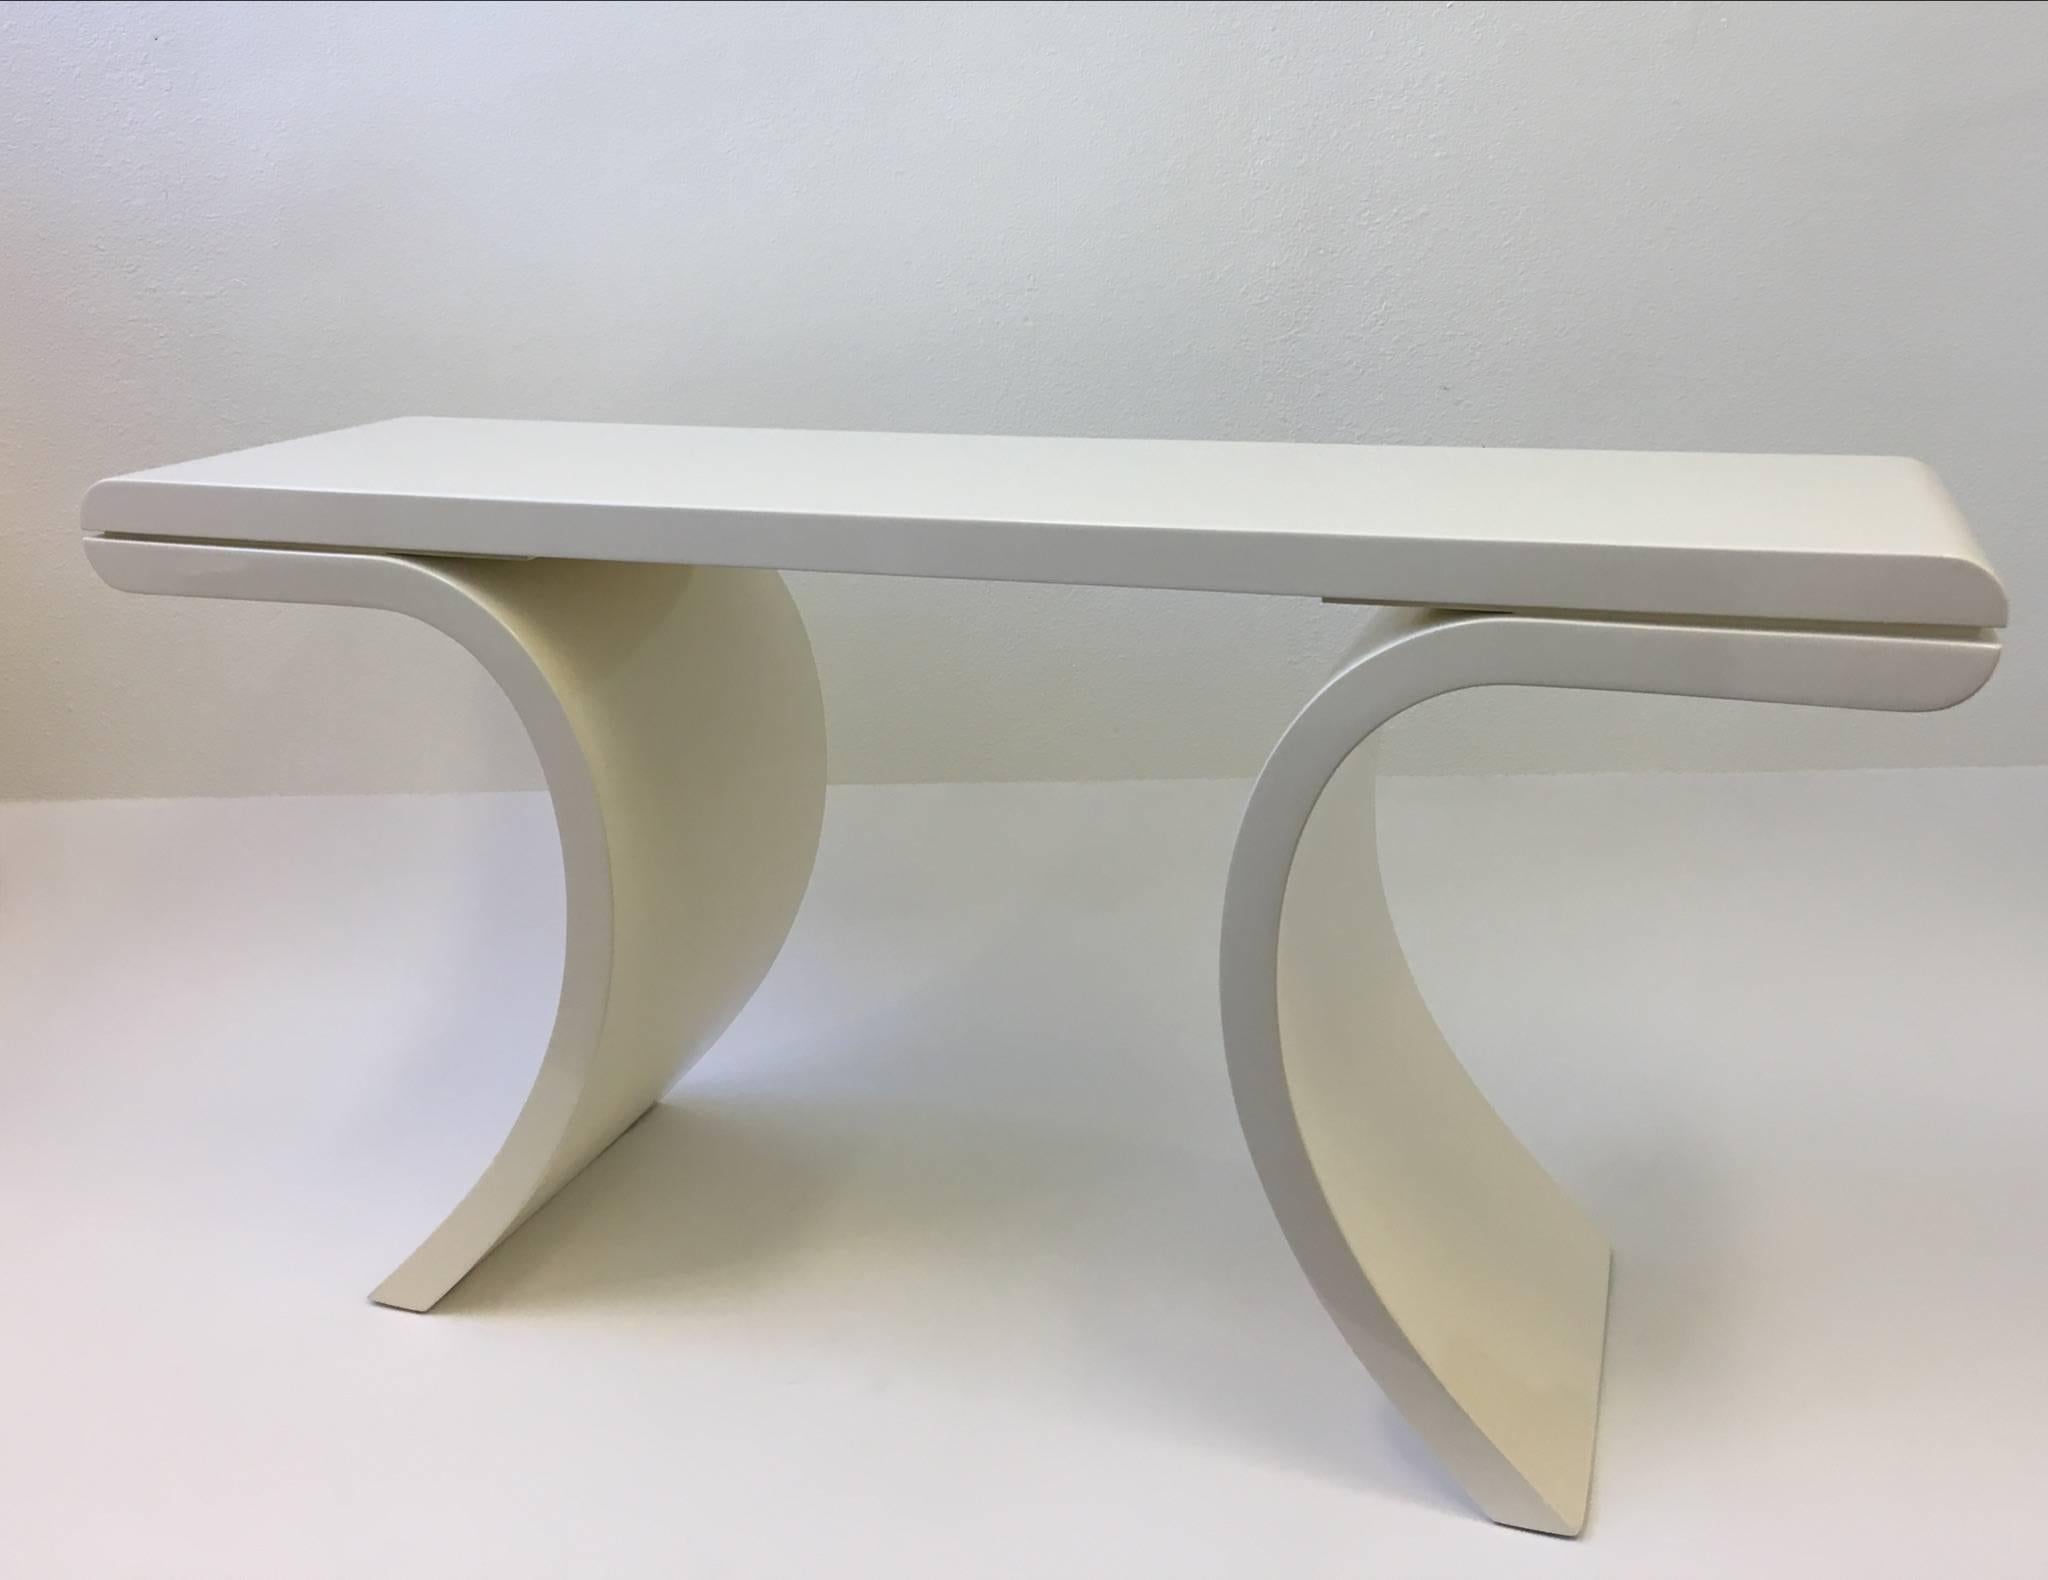 A glamorous high gloss lacquered console table in the manner of Karl Springer. This were usually covered in goatskin or lacquered. 
Newly professionally lacquered and polished in a off-white color. 

Dimensions: 28.75